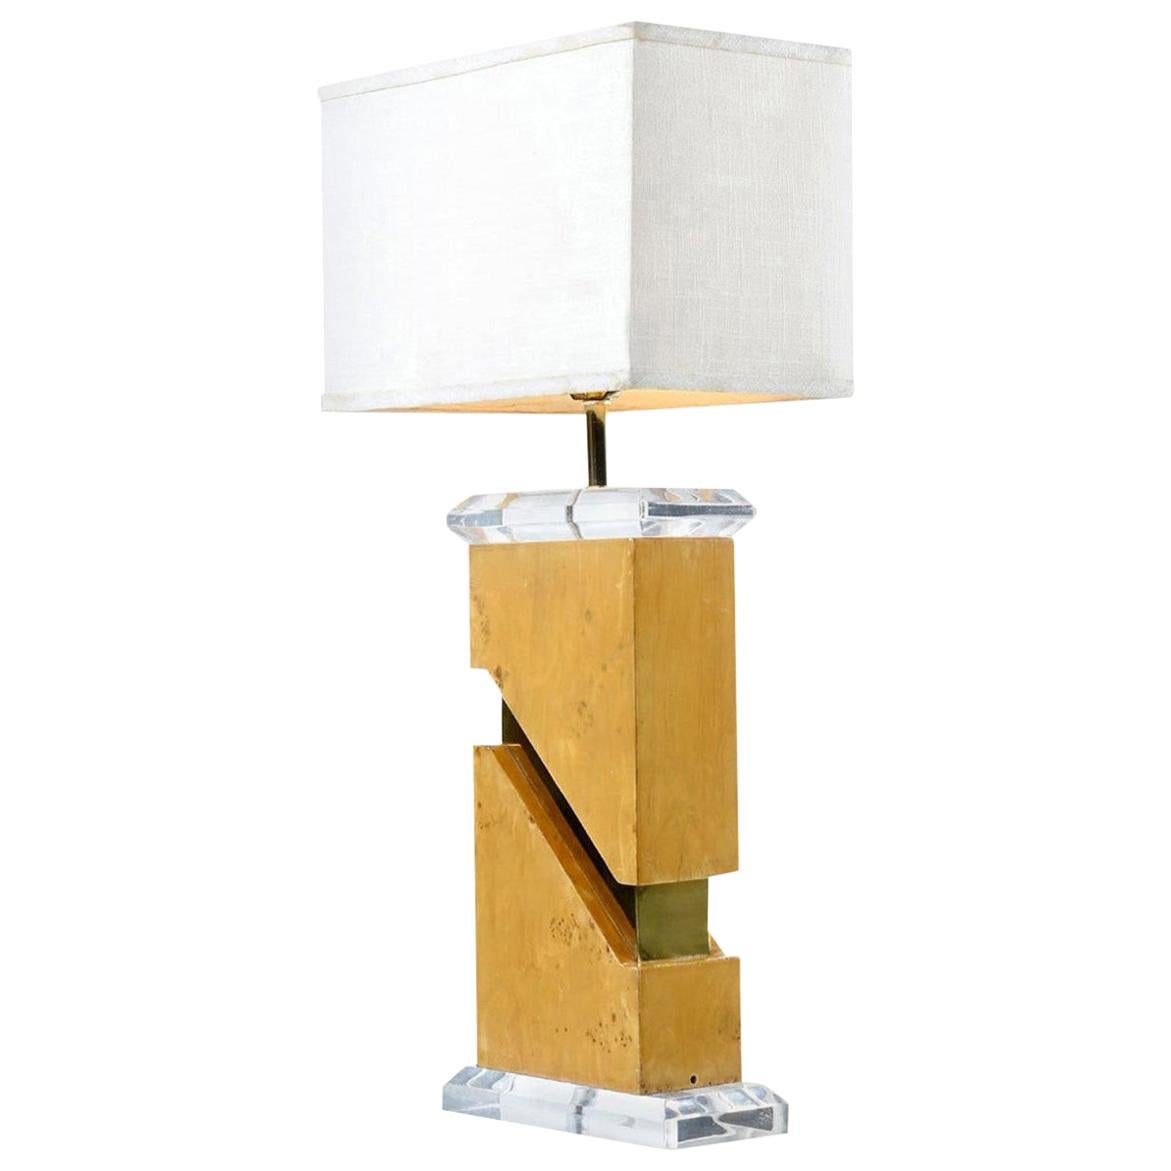 Milo Baughman Style 1970s Burl Table Lamp with Lucite and Gold Accents